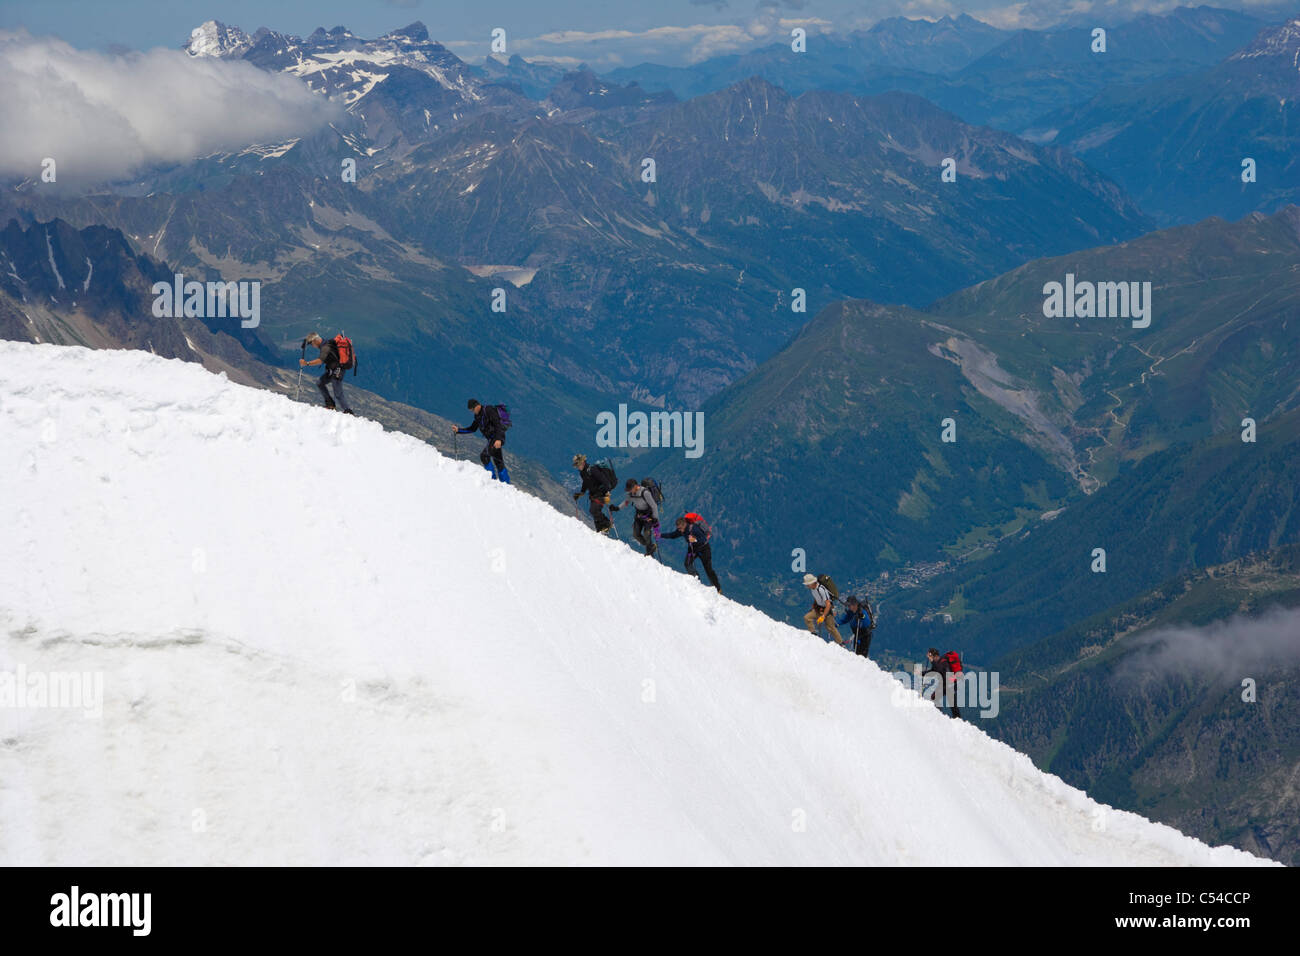 Mountaineers ascend from the Vallee Blanche to the Aiguille du Midi, Chamonix, France, Mont Blanc Massif, Alps Stock Photo